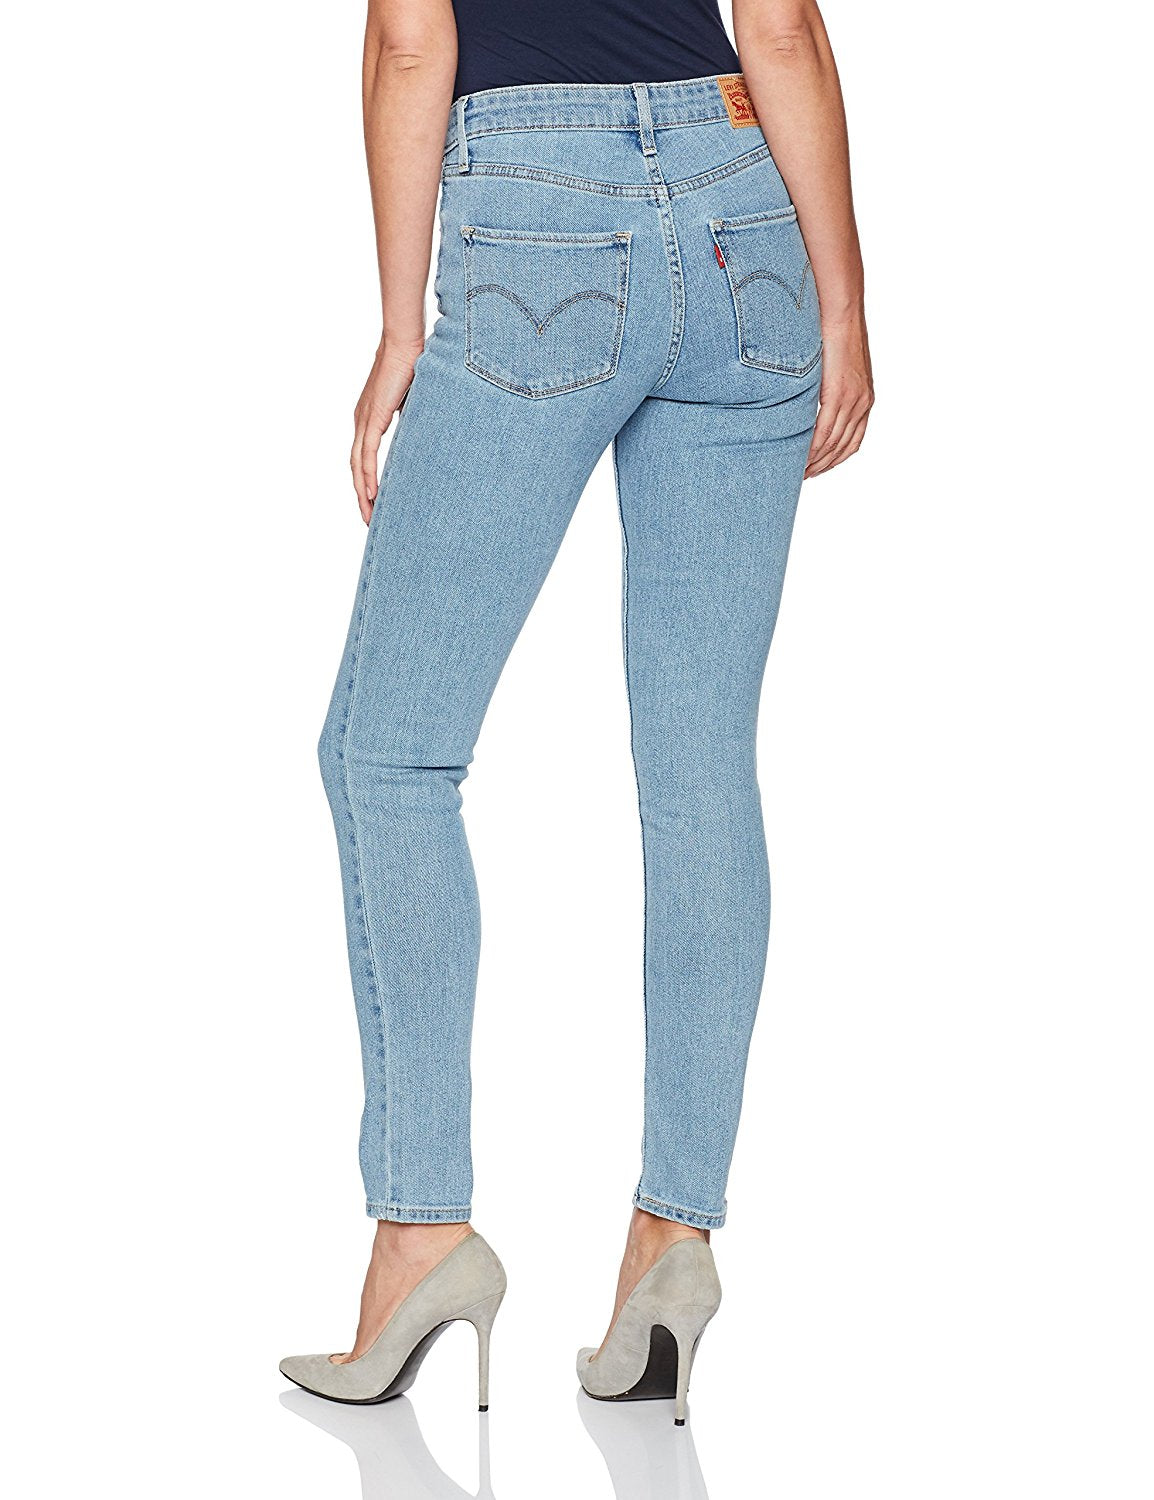 Levi's Women's 721 High Rise Jeans – Imax